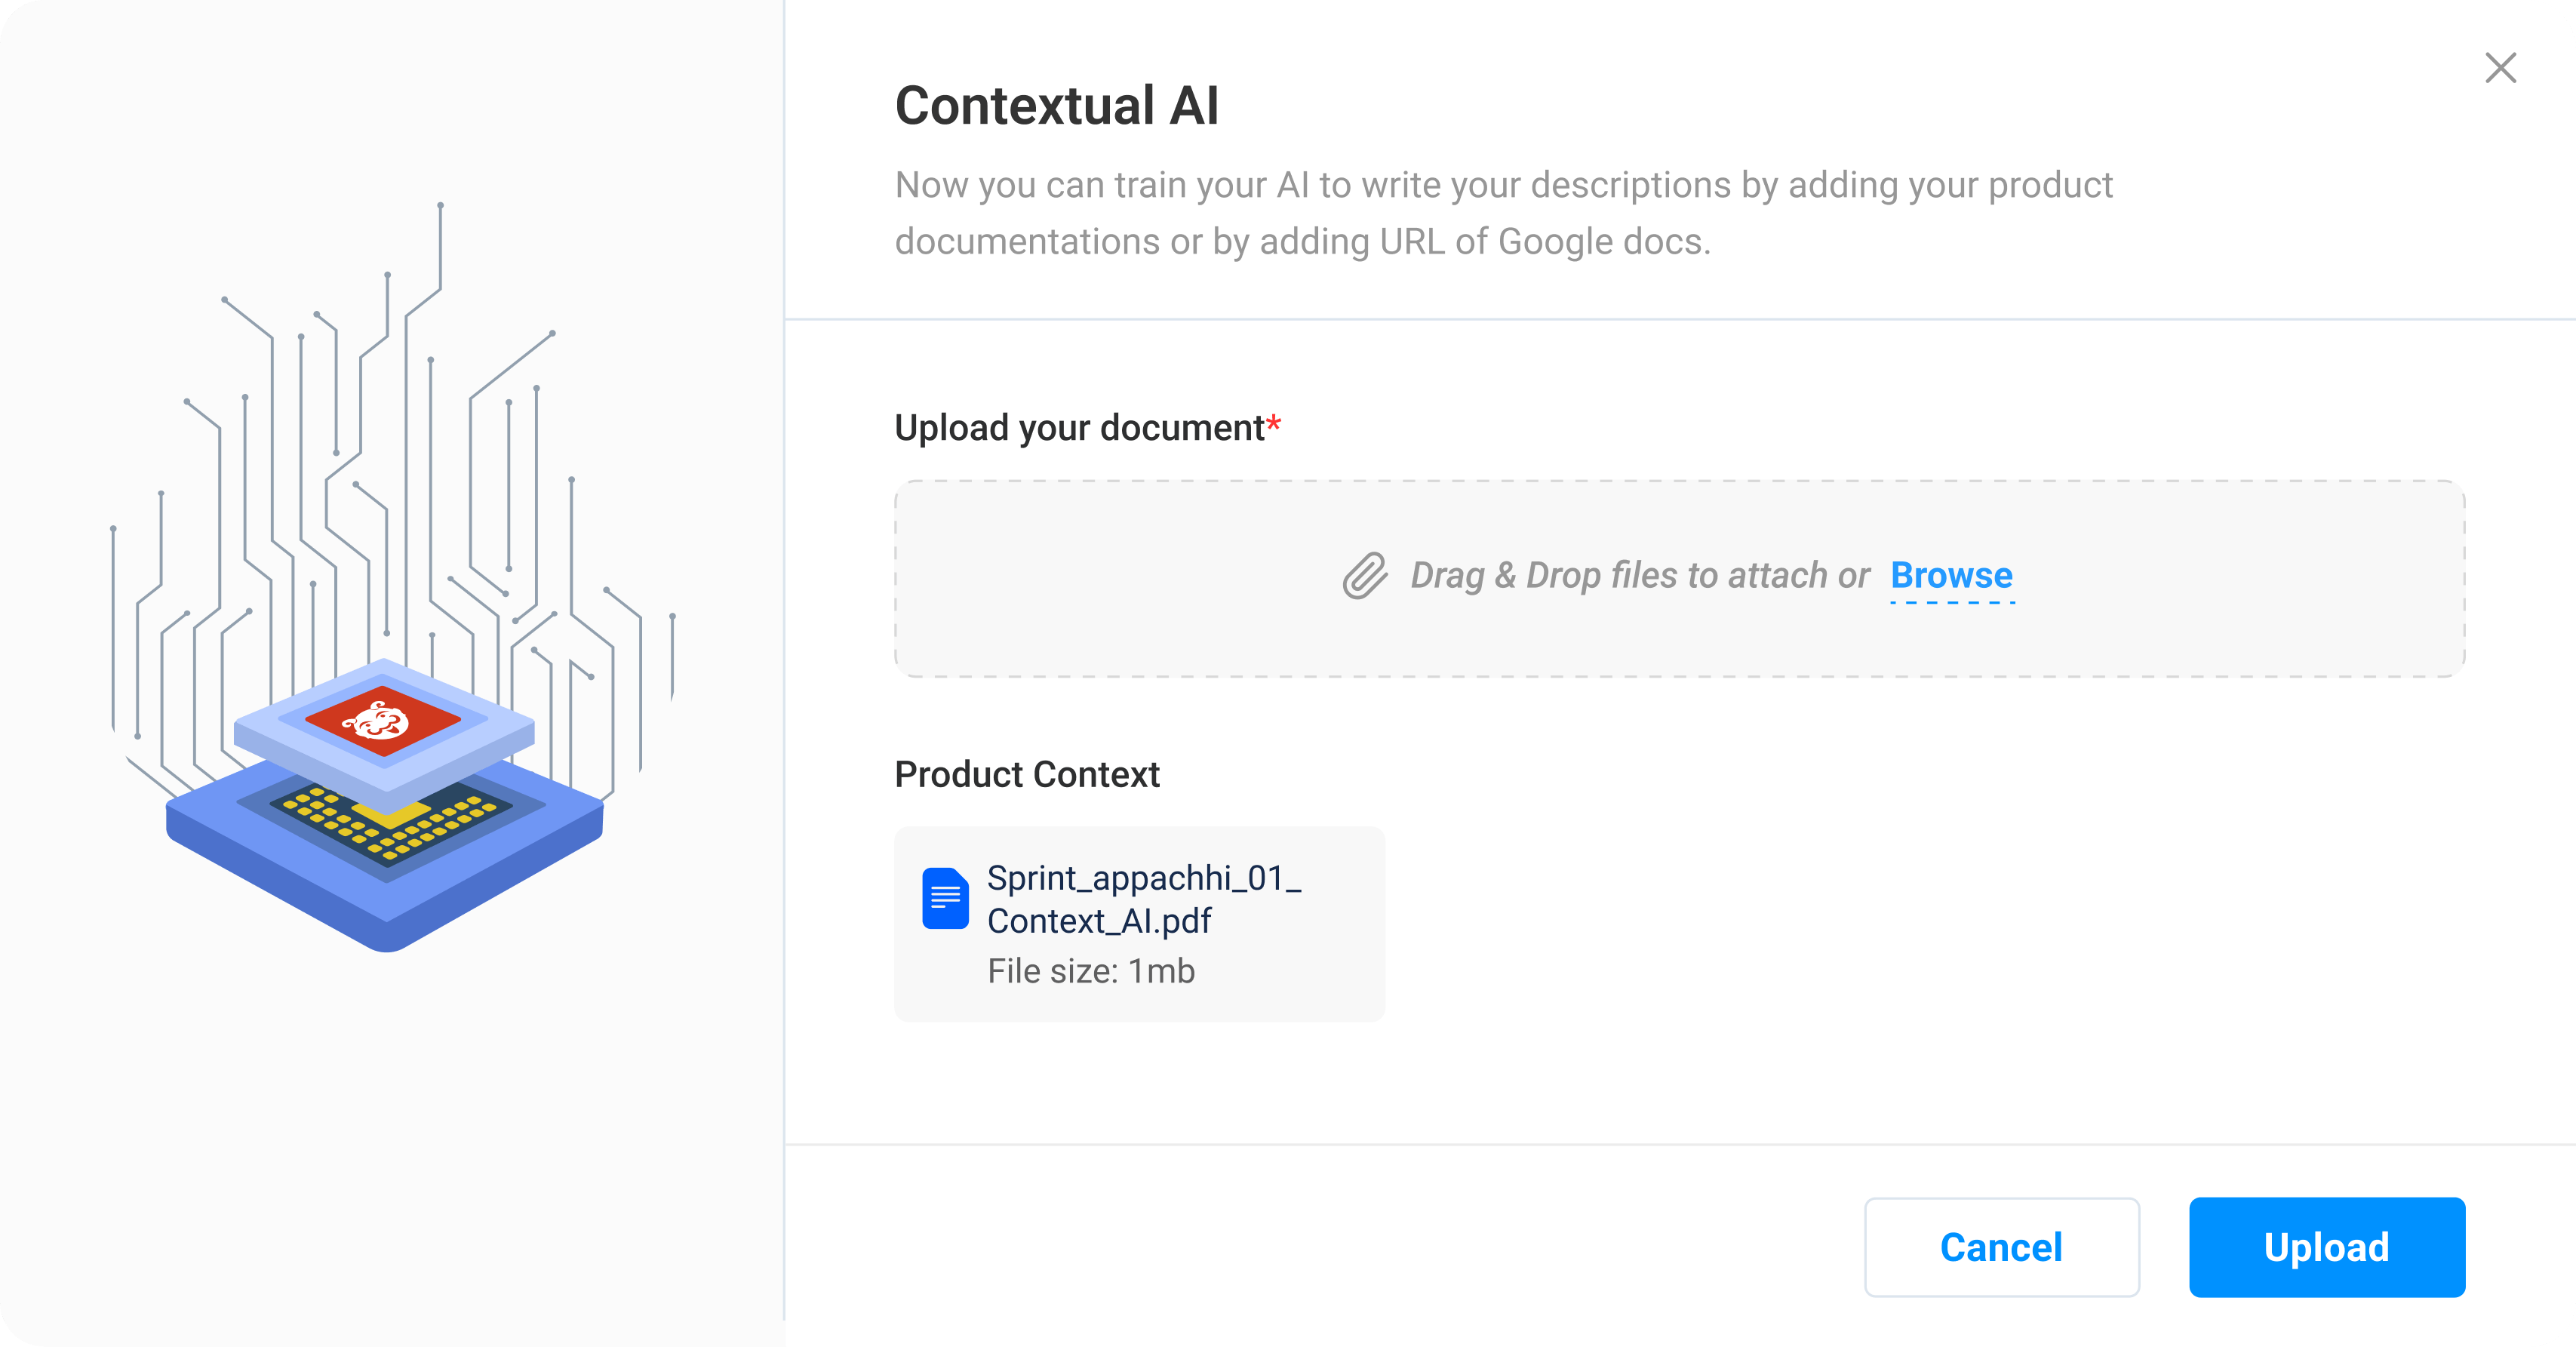 Upload context document to generate contextual issue descriptions